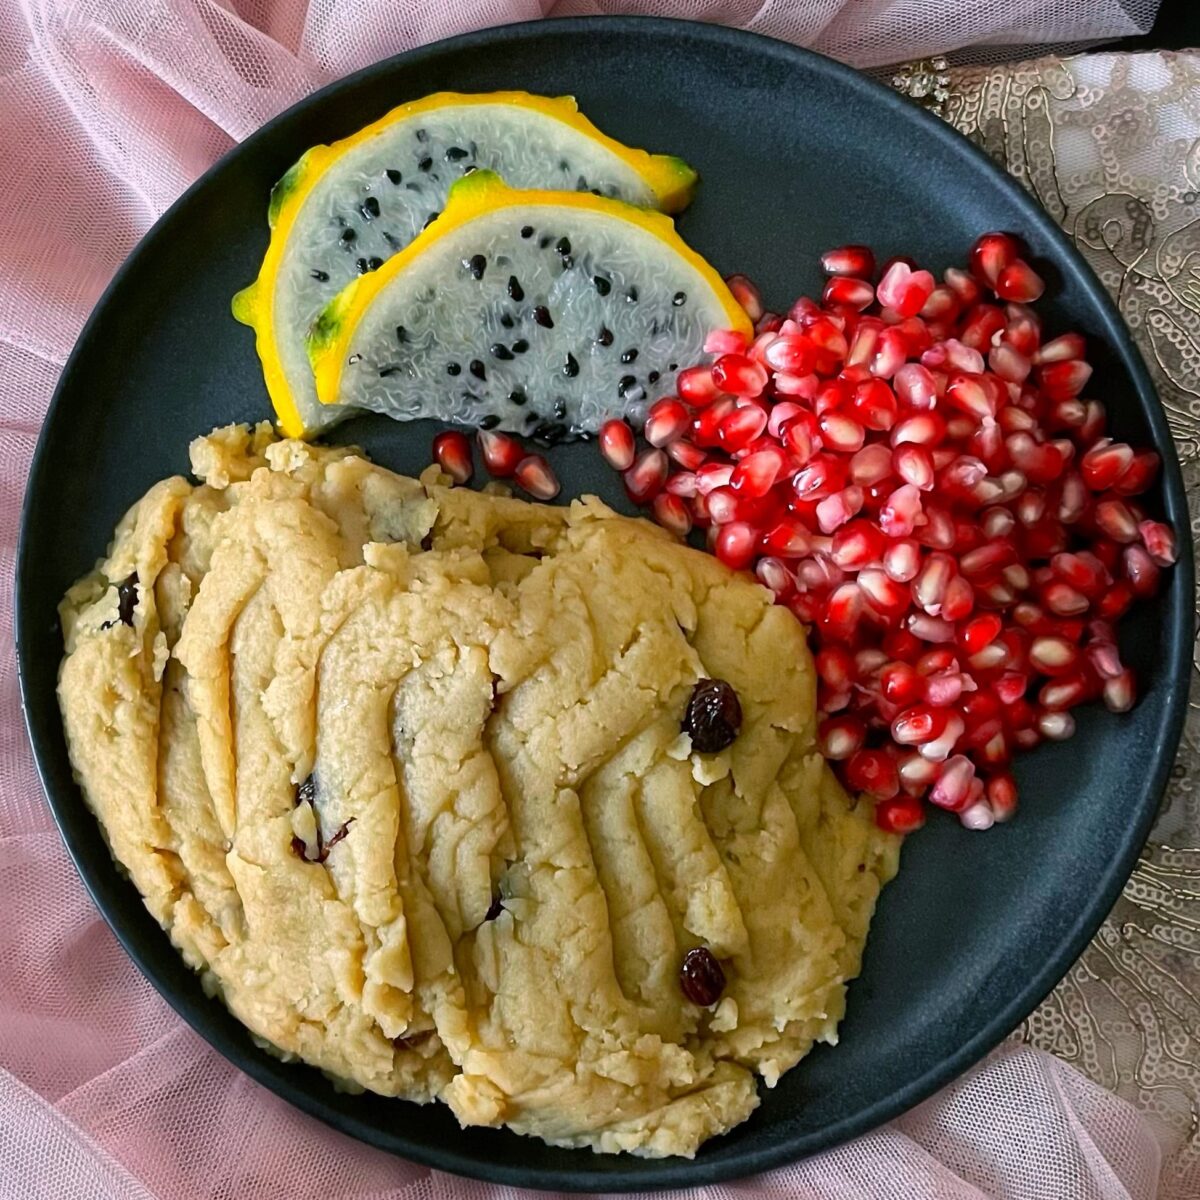 parasad, pomegranate and dragon fruit on a gray plate